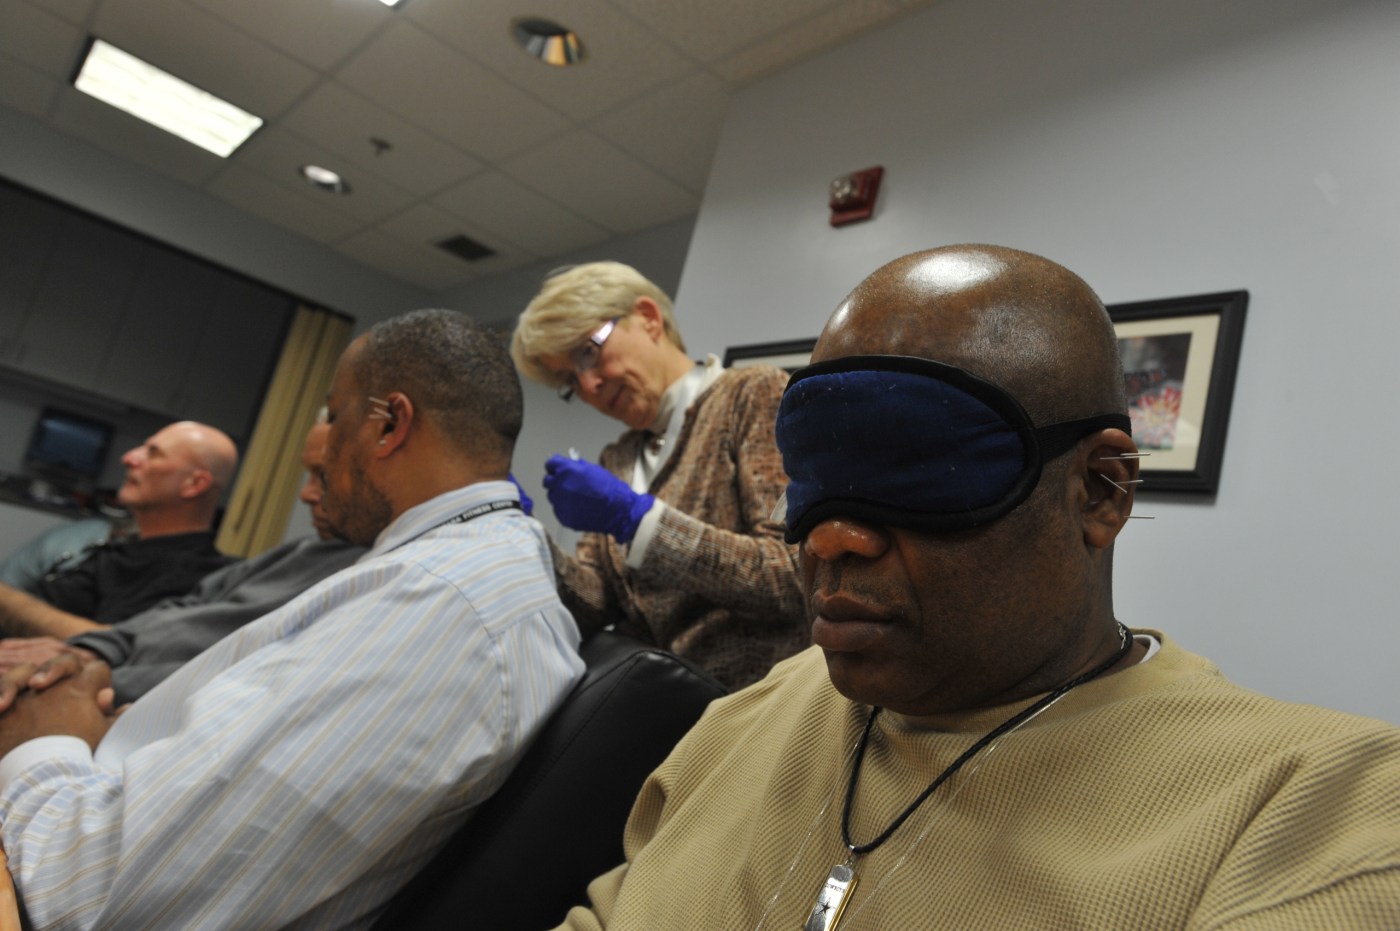 Veterans receive battlefield acupuncture treatment at the Washington DC VA Medical Center. An eye mask and soothing music in the background help create a relaxing environment.